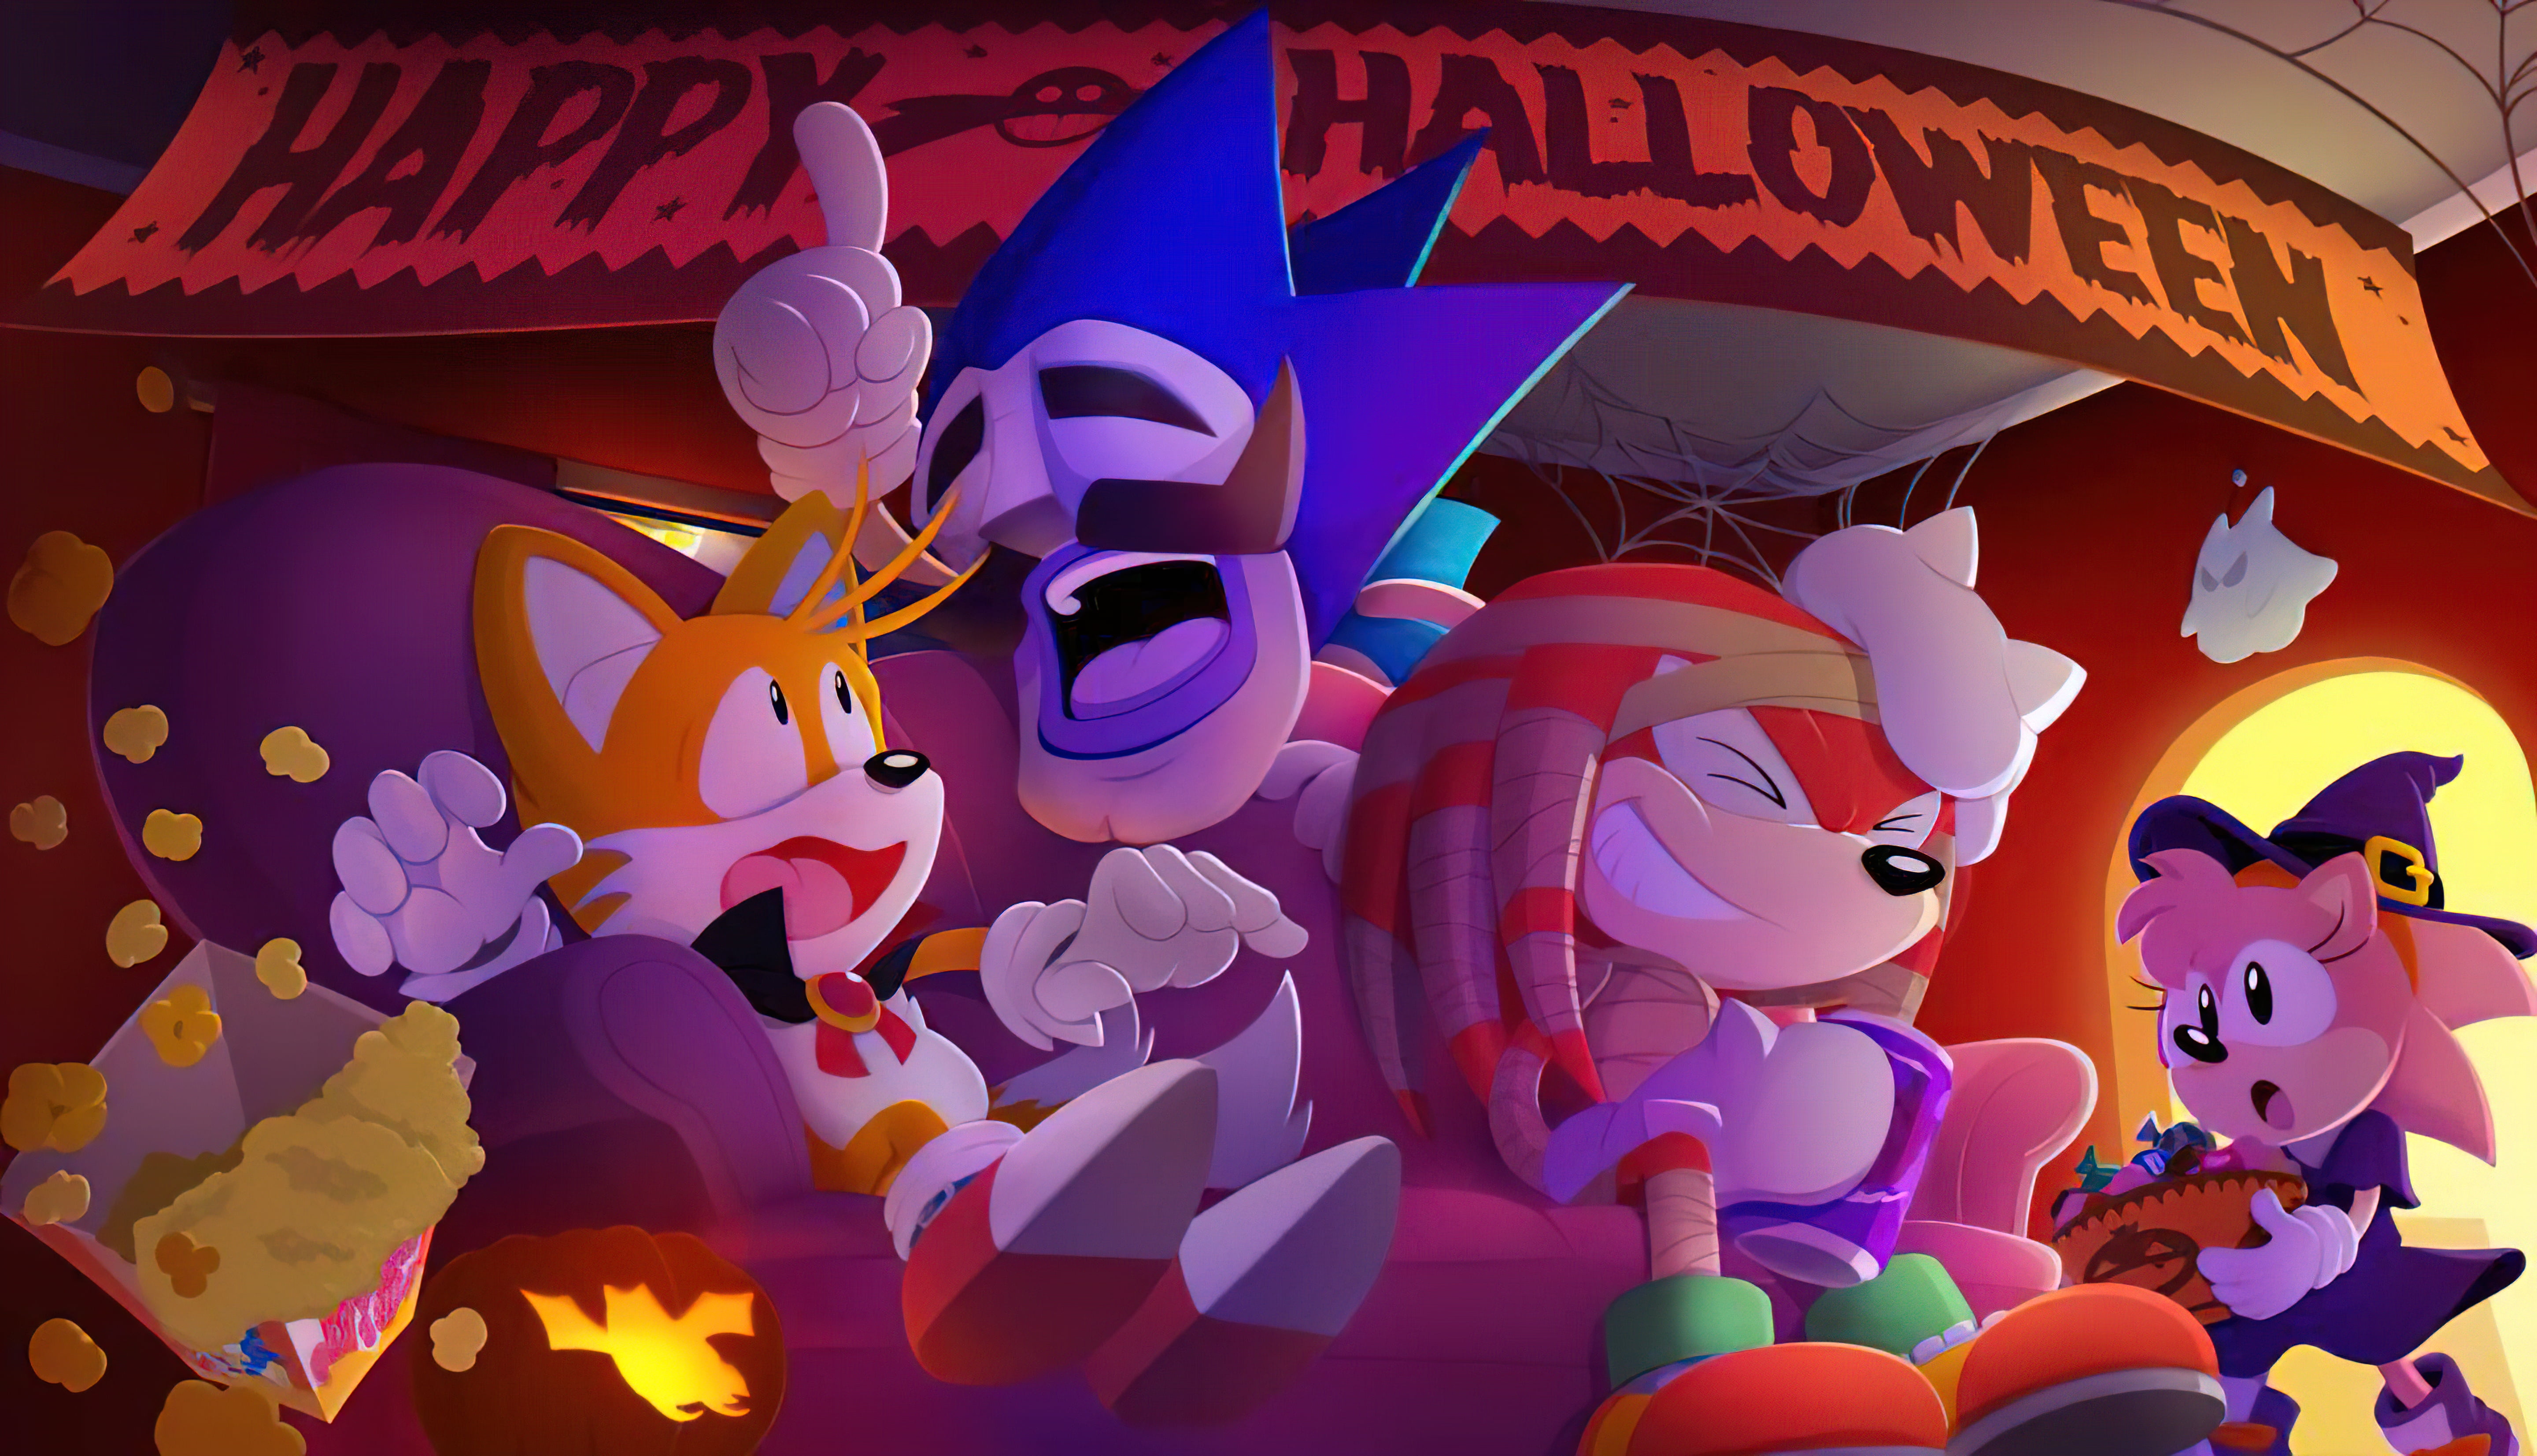 Sonic, Sonic the Hedgehog, Tails (character), Amy Rose, Sega